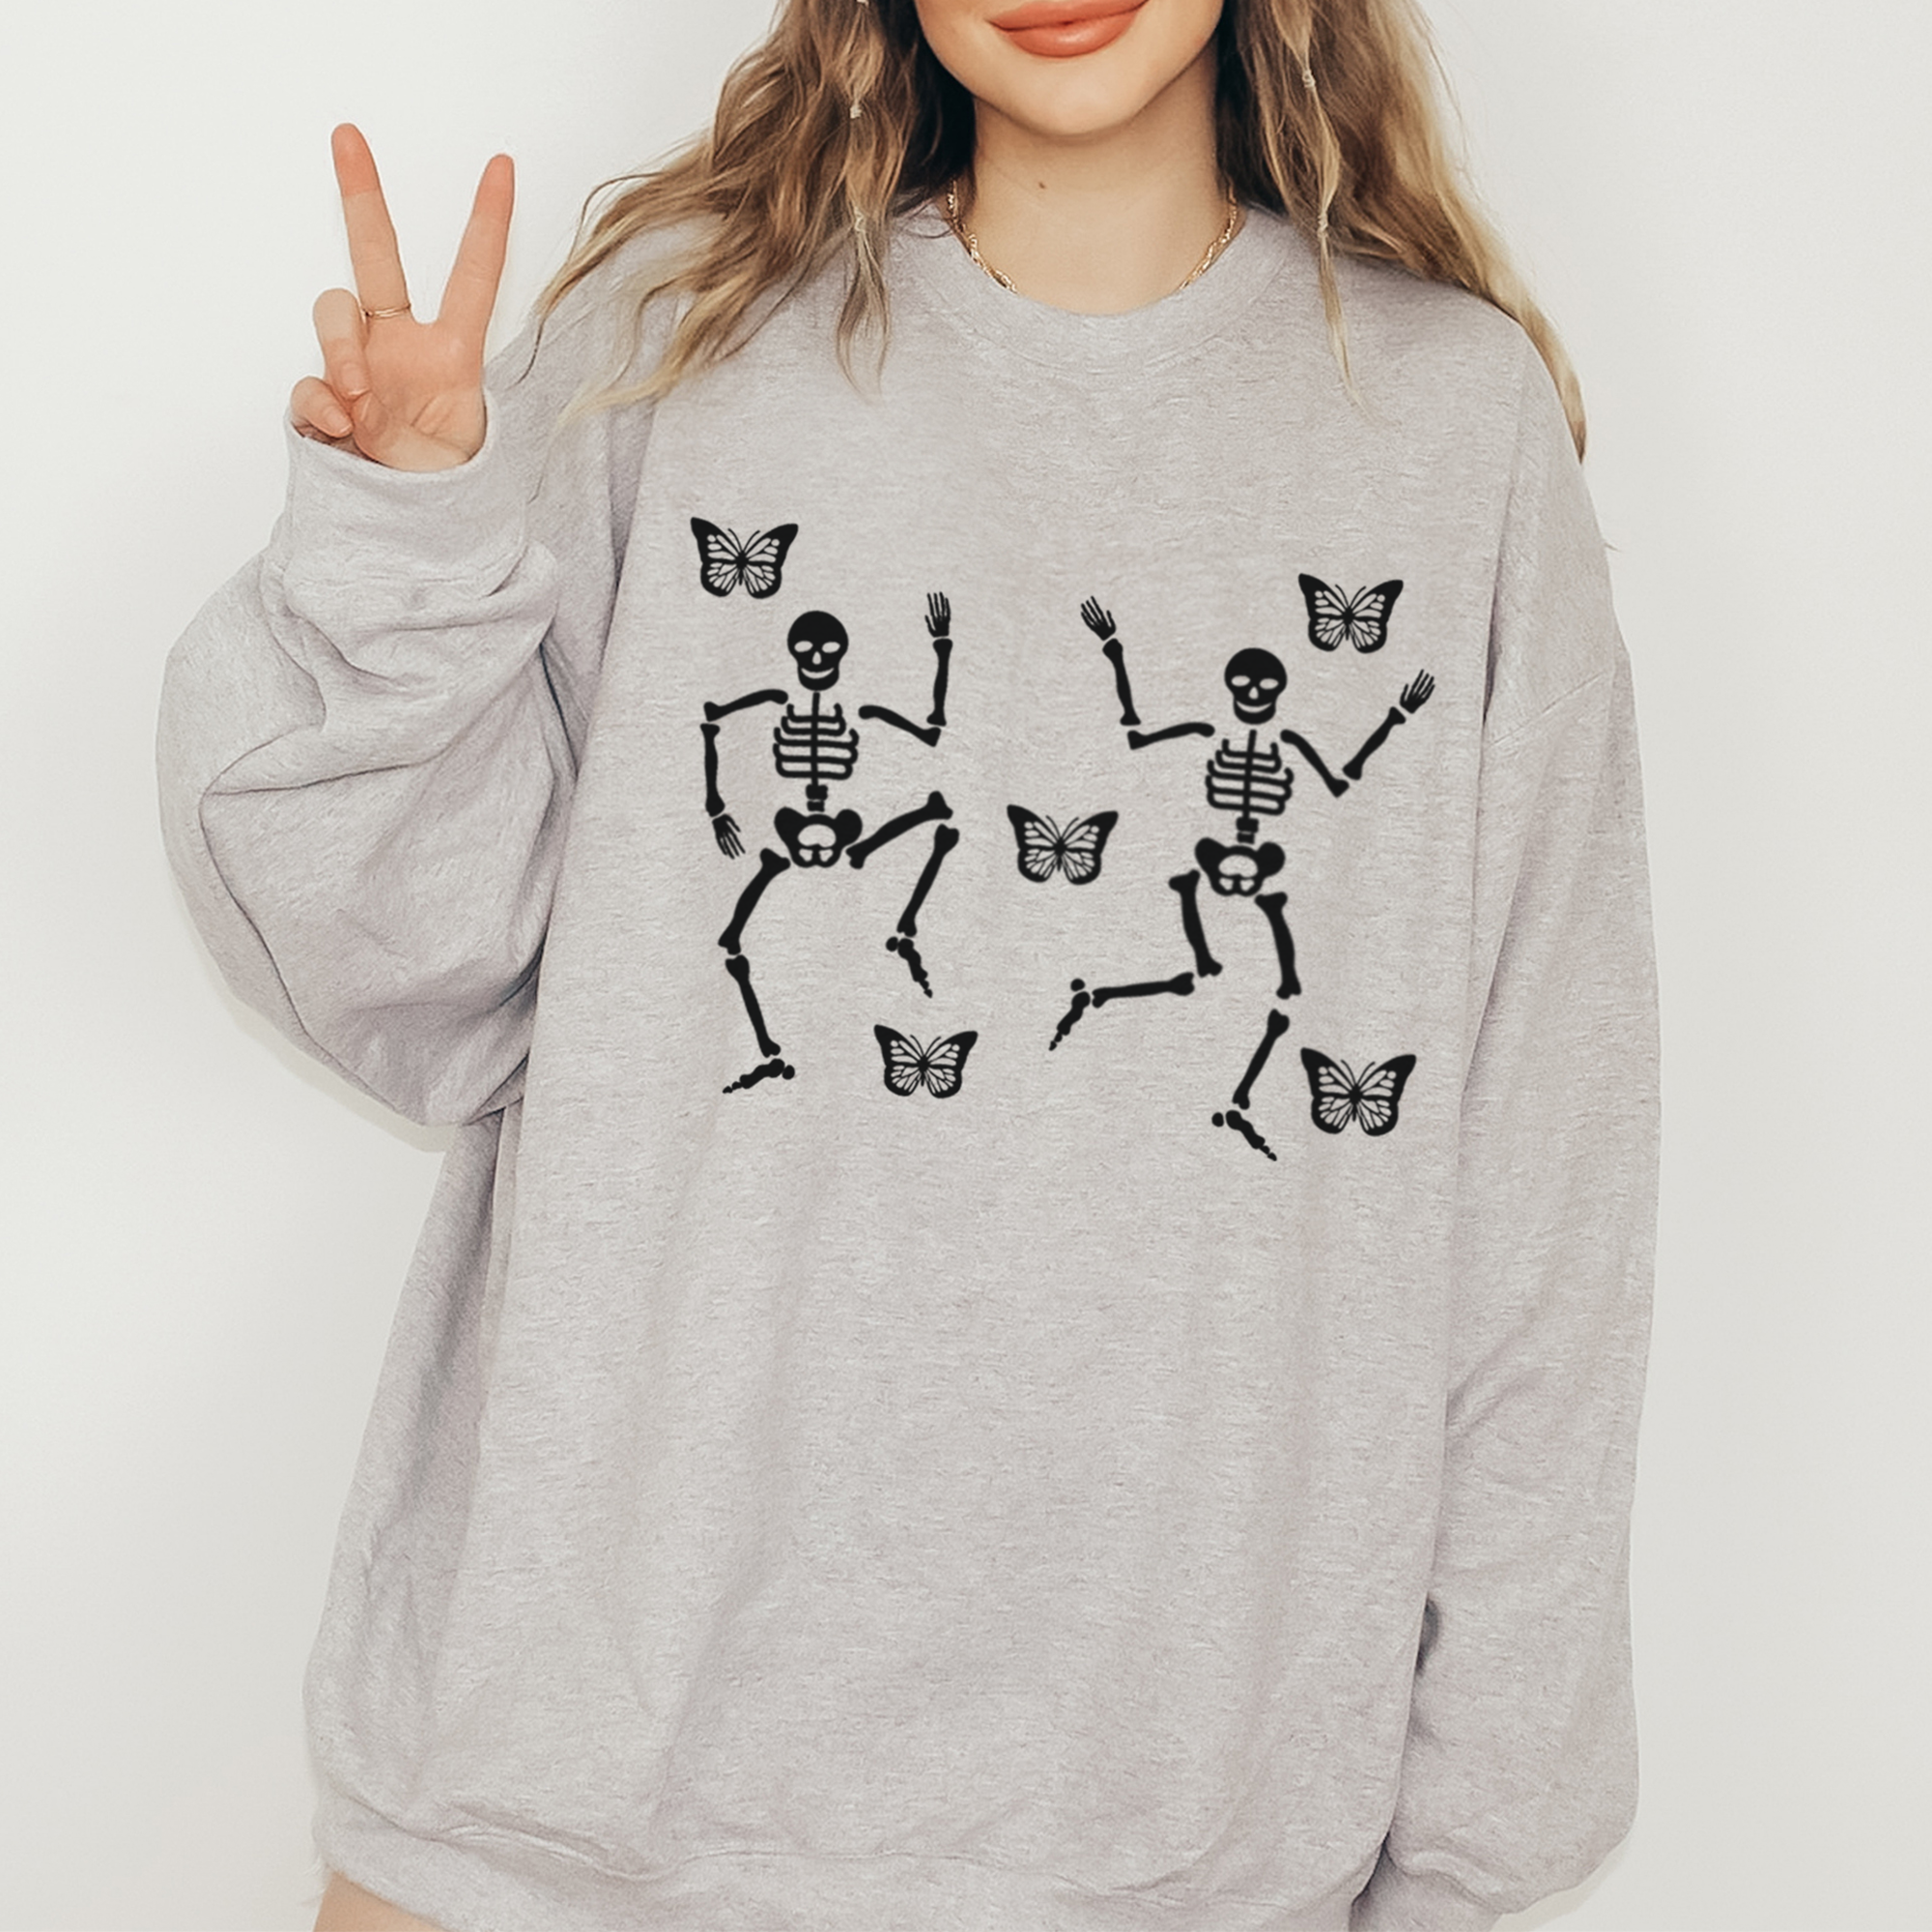 A great Sweatshirt to showcase your Halloween spirit in a wide array of colors and sizes. all SKUs